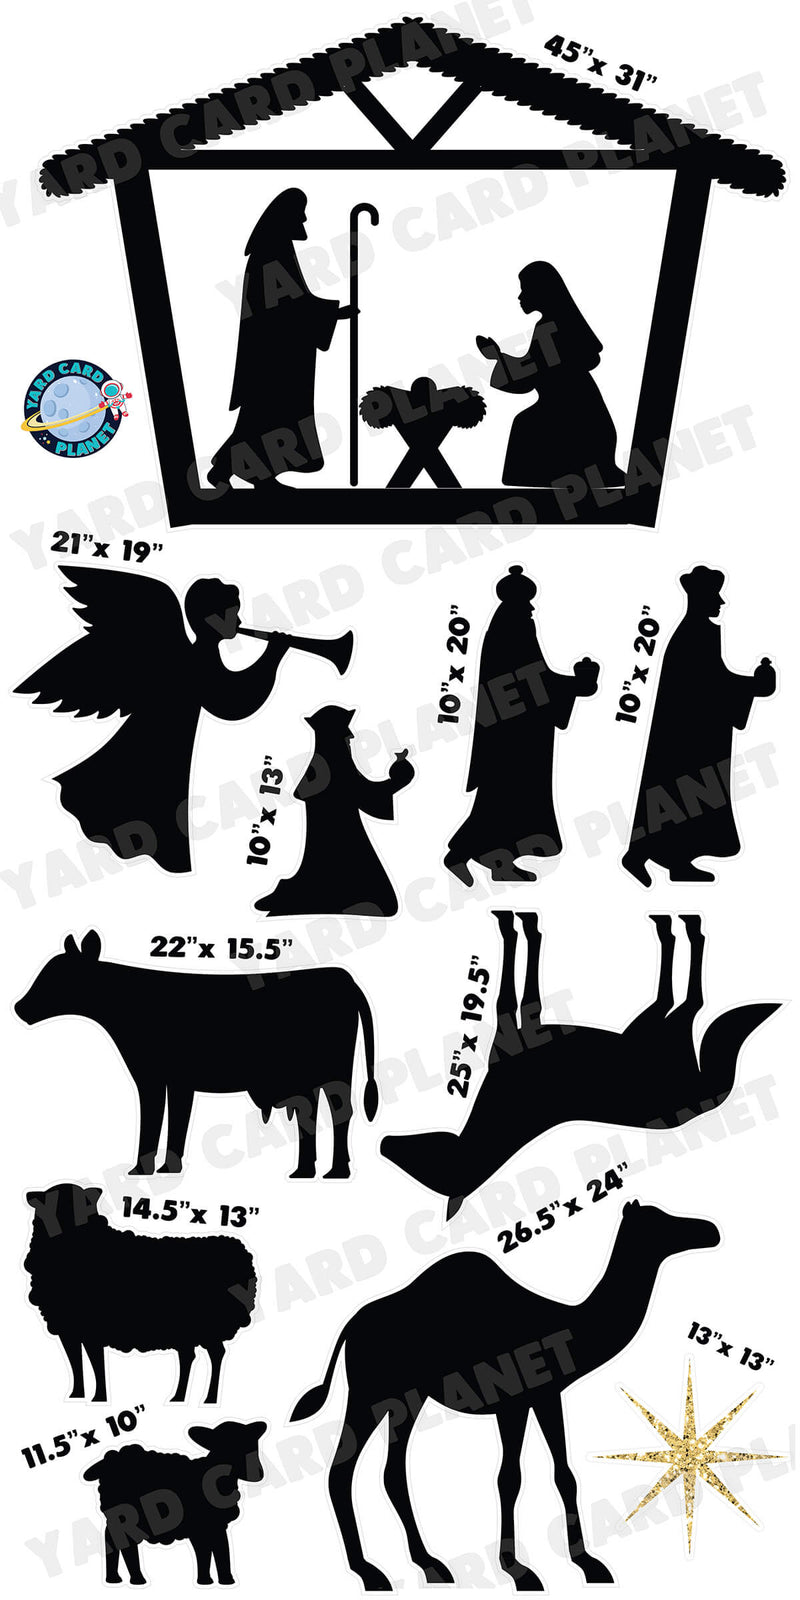 Christmas Nativity Scene Silhouette Yard Card Flair Set with Measurements